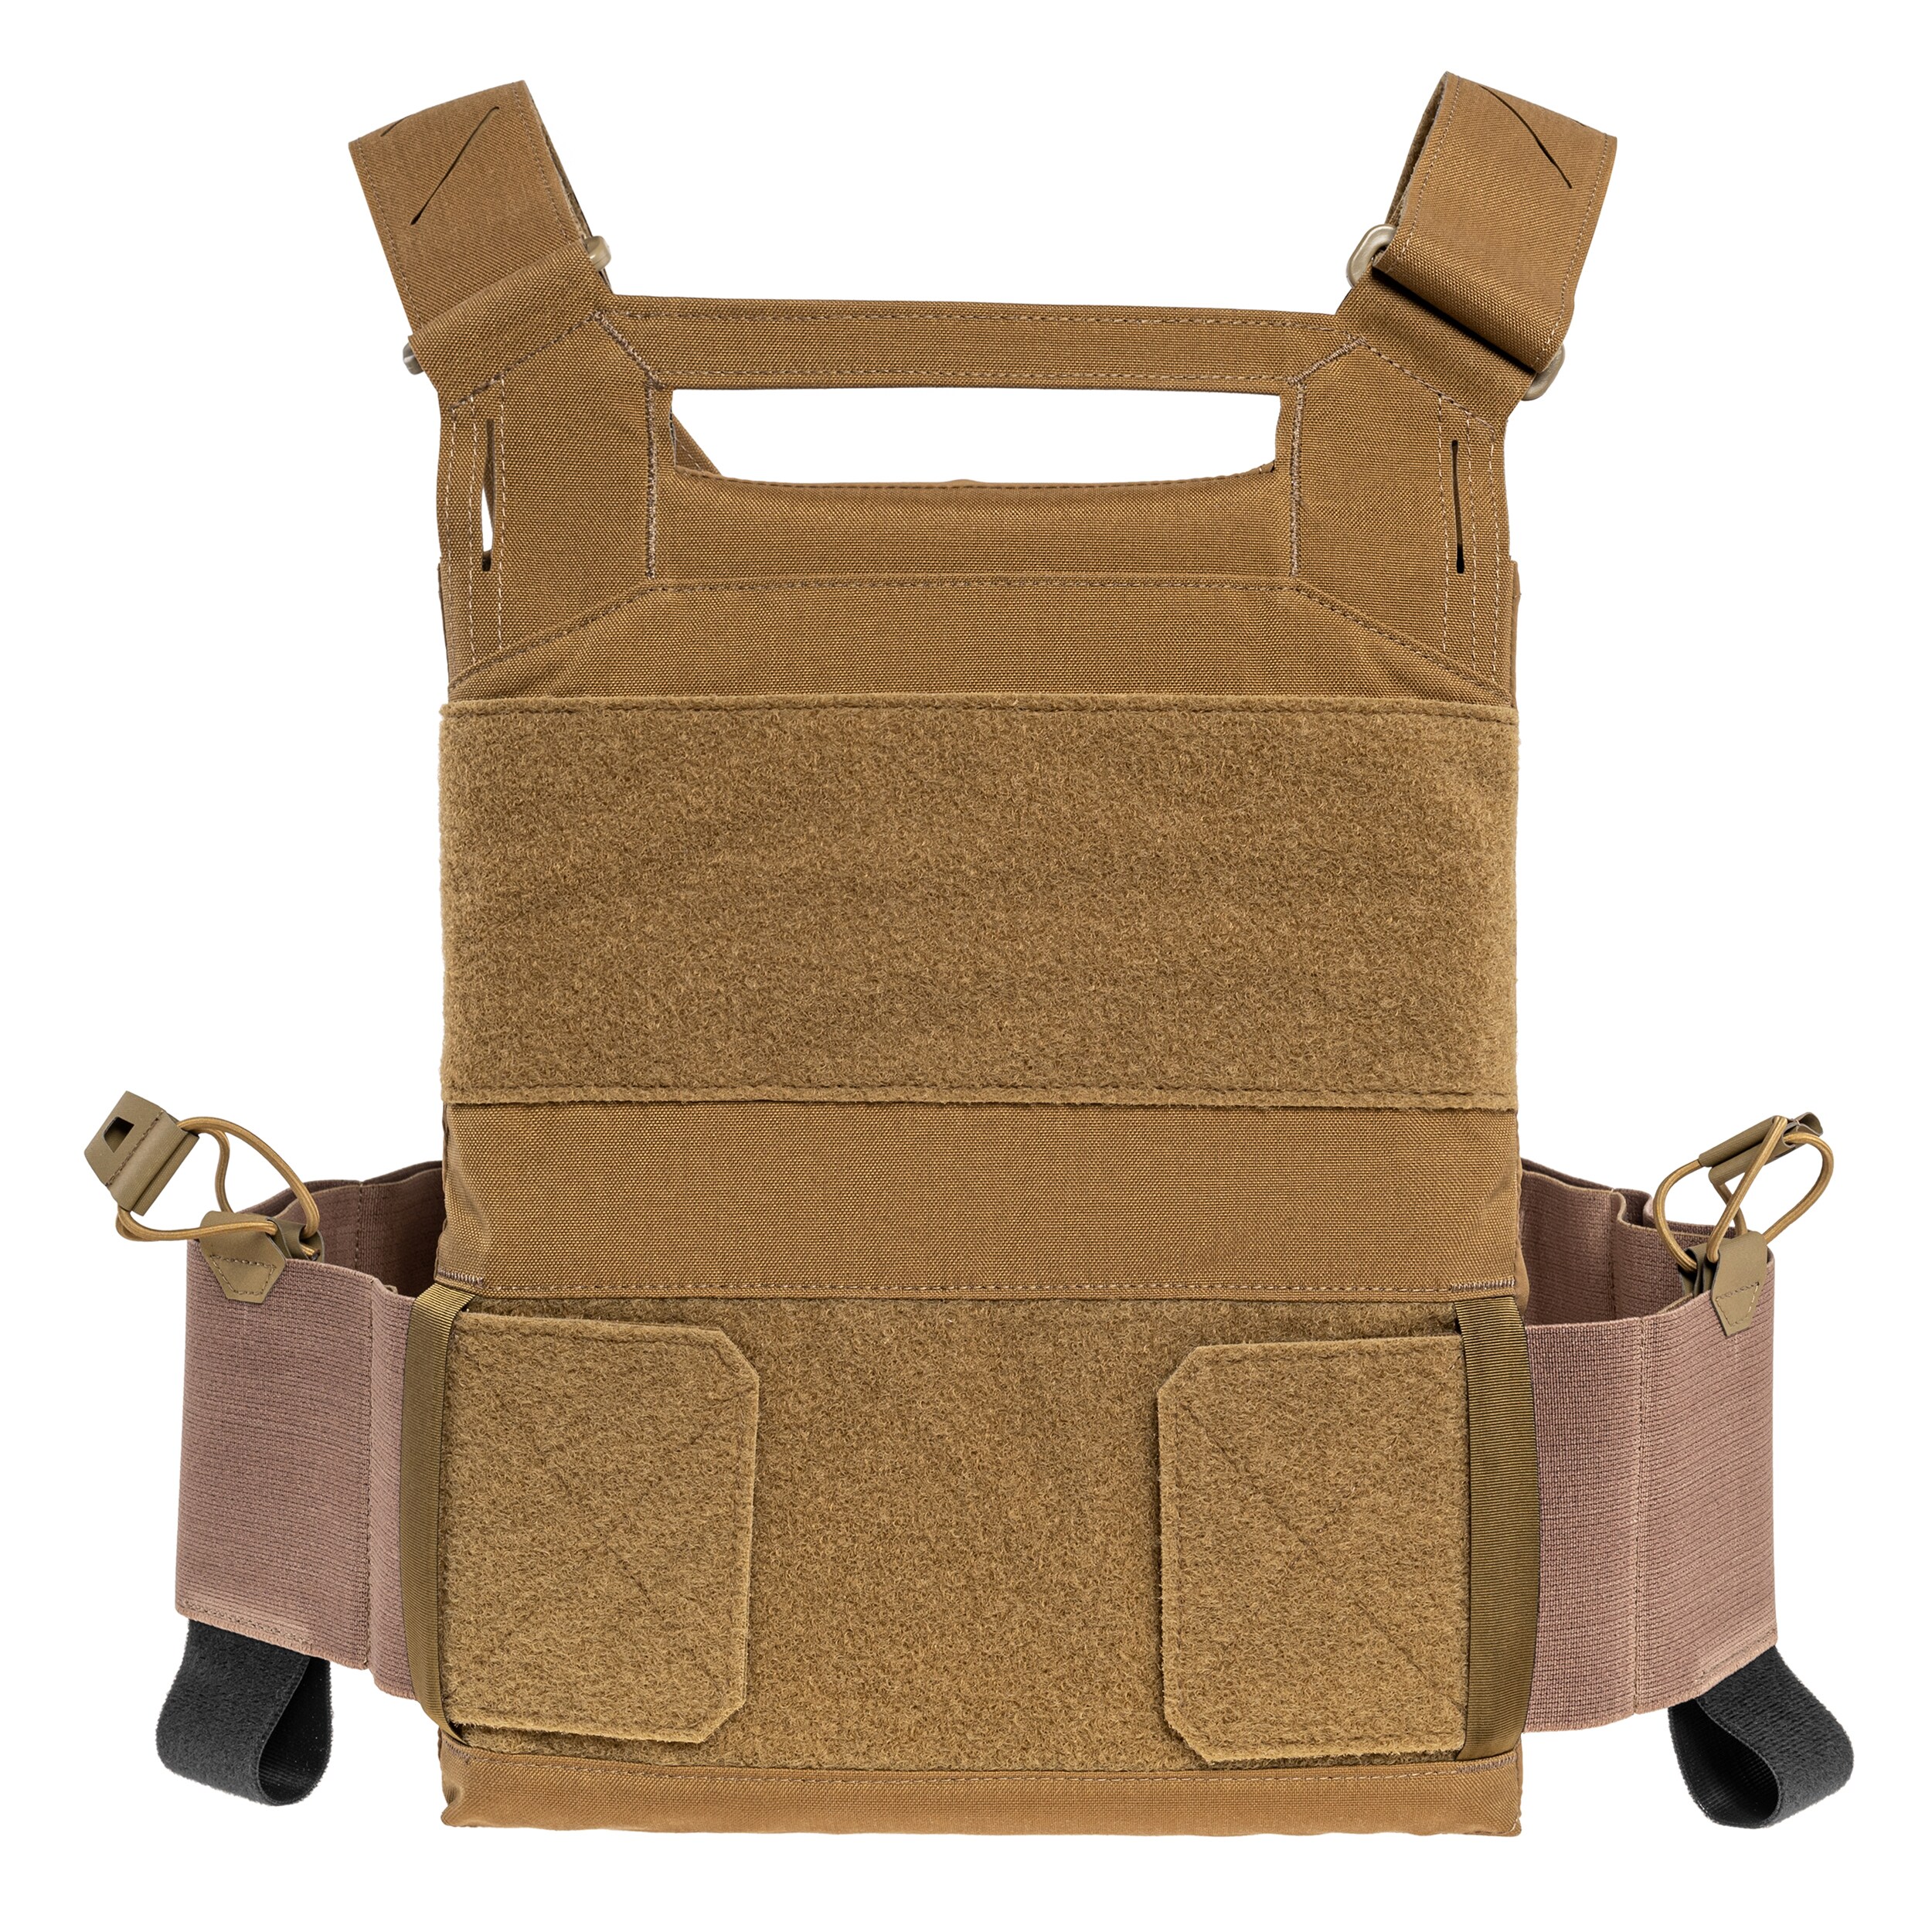 Kamizelka taktyczna Direct Action Hellcat Low Vis Plate Carrier - Coyote Brown